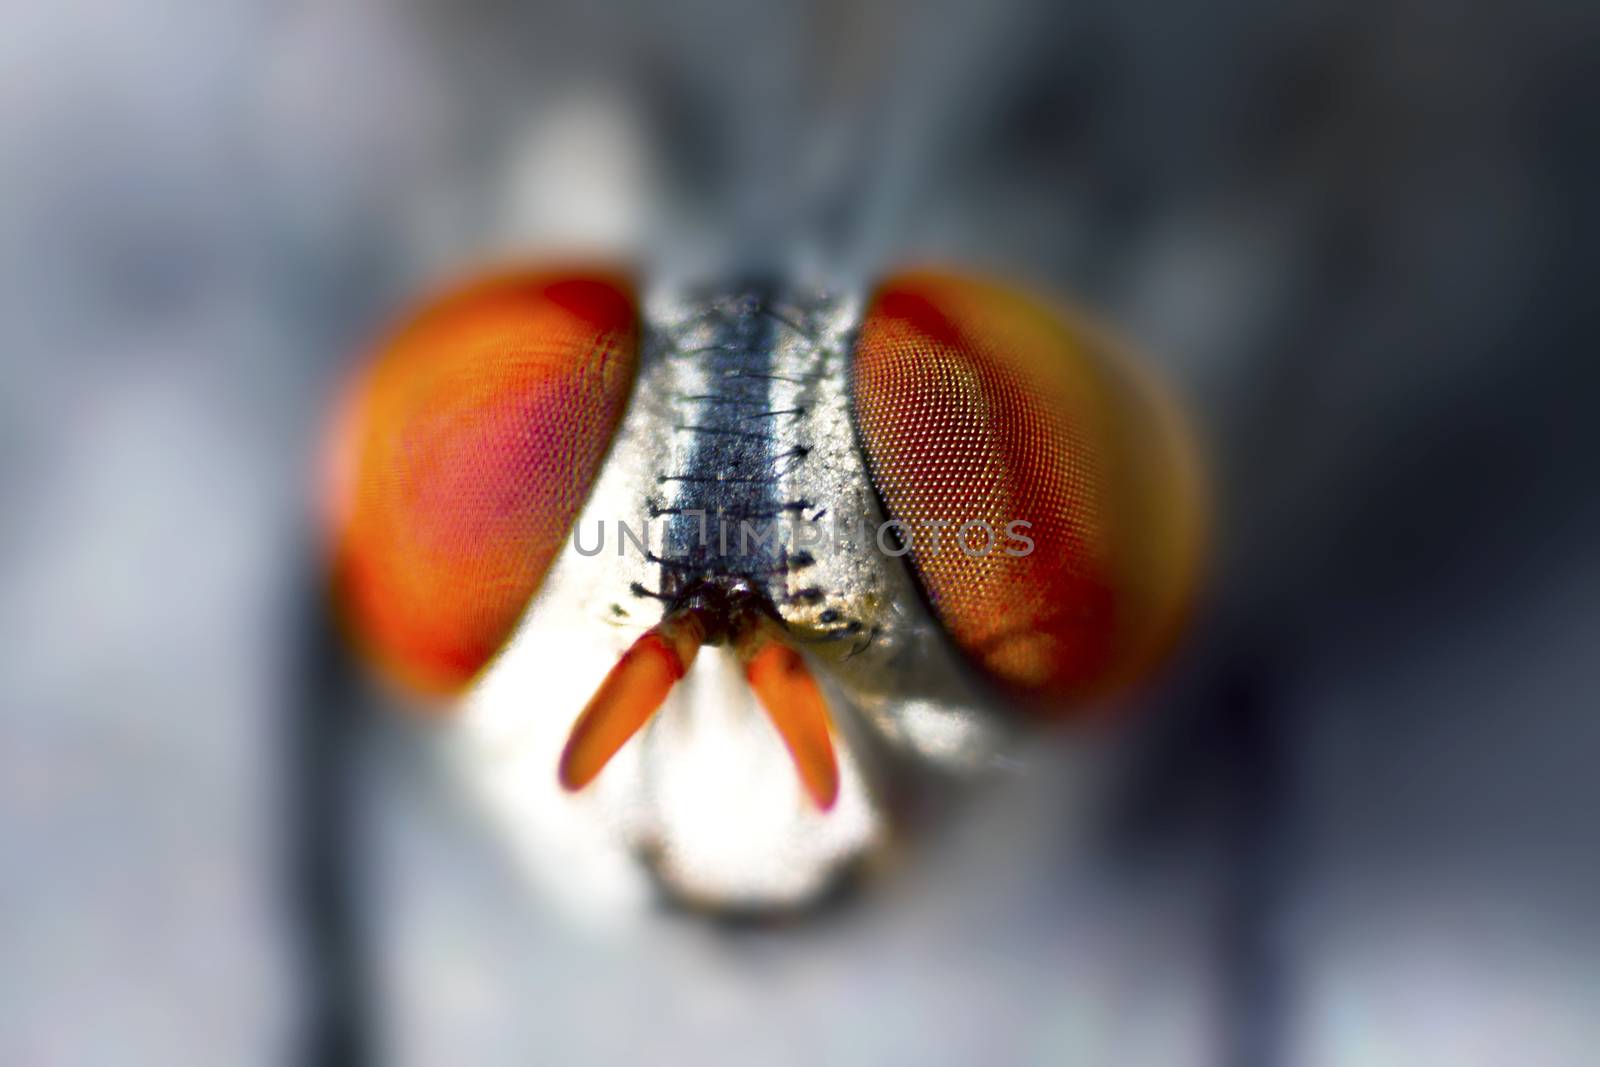 Extreme close up of a common house fly by stockbp